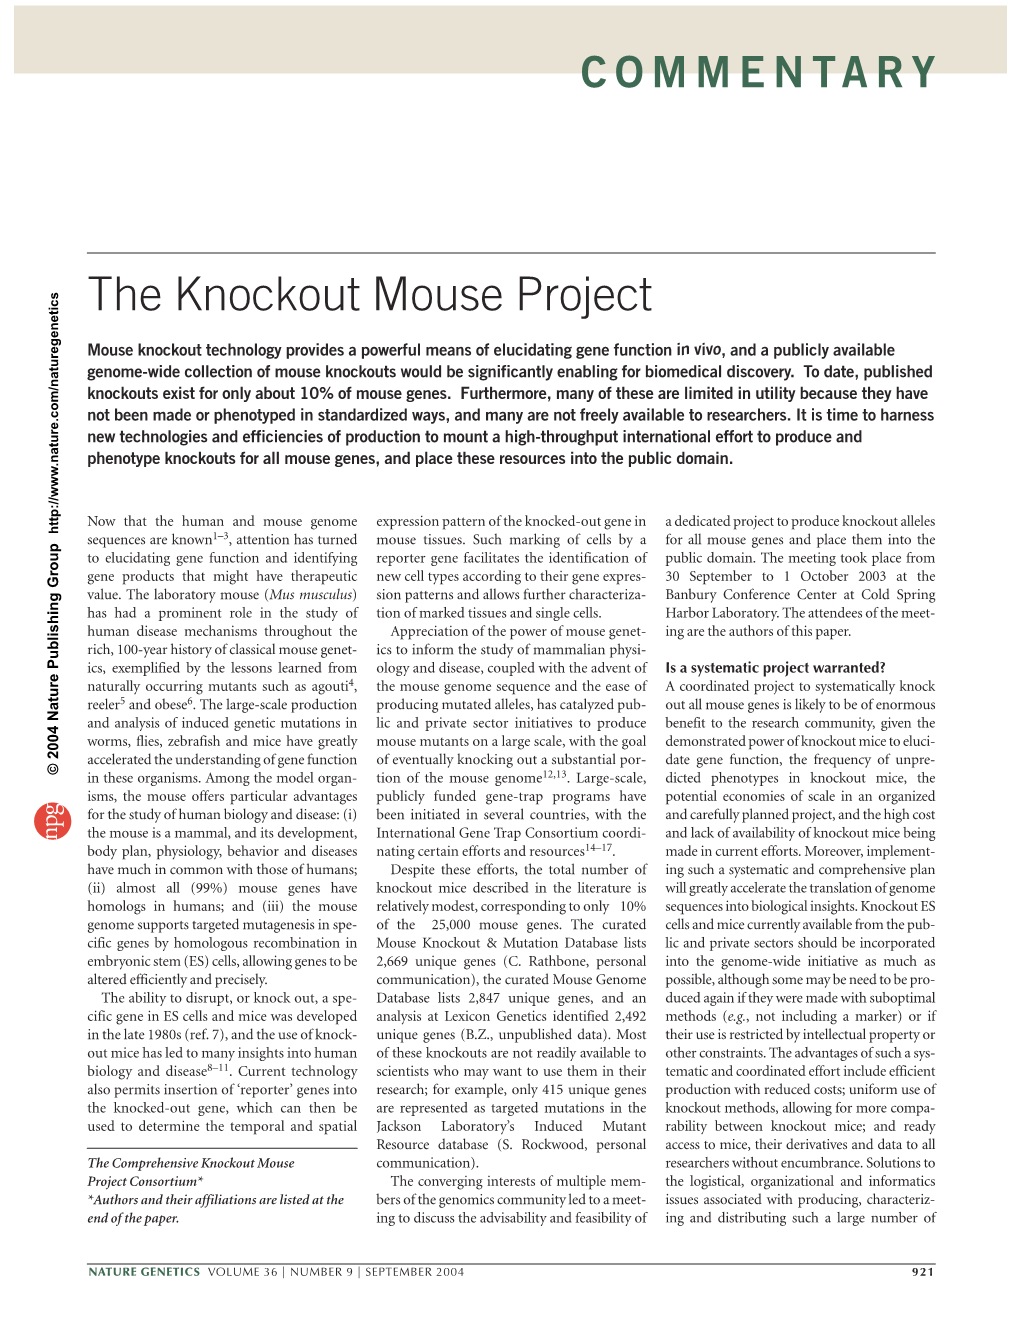 Commentary: the Knockout Mouse Project